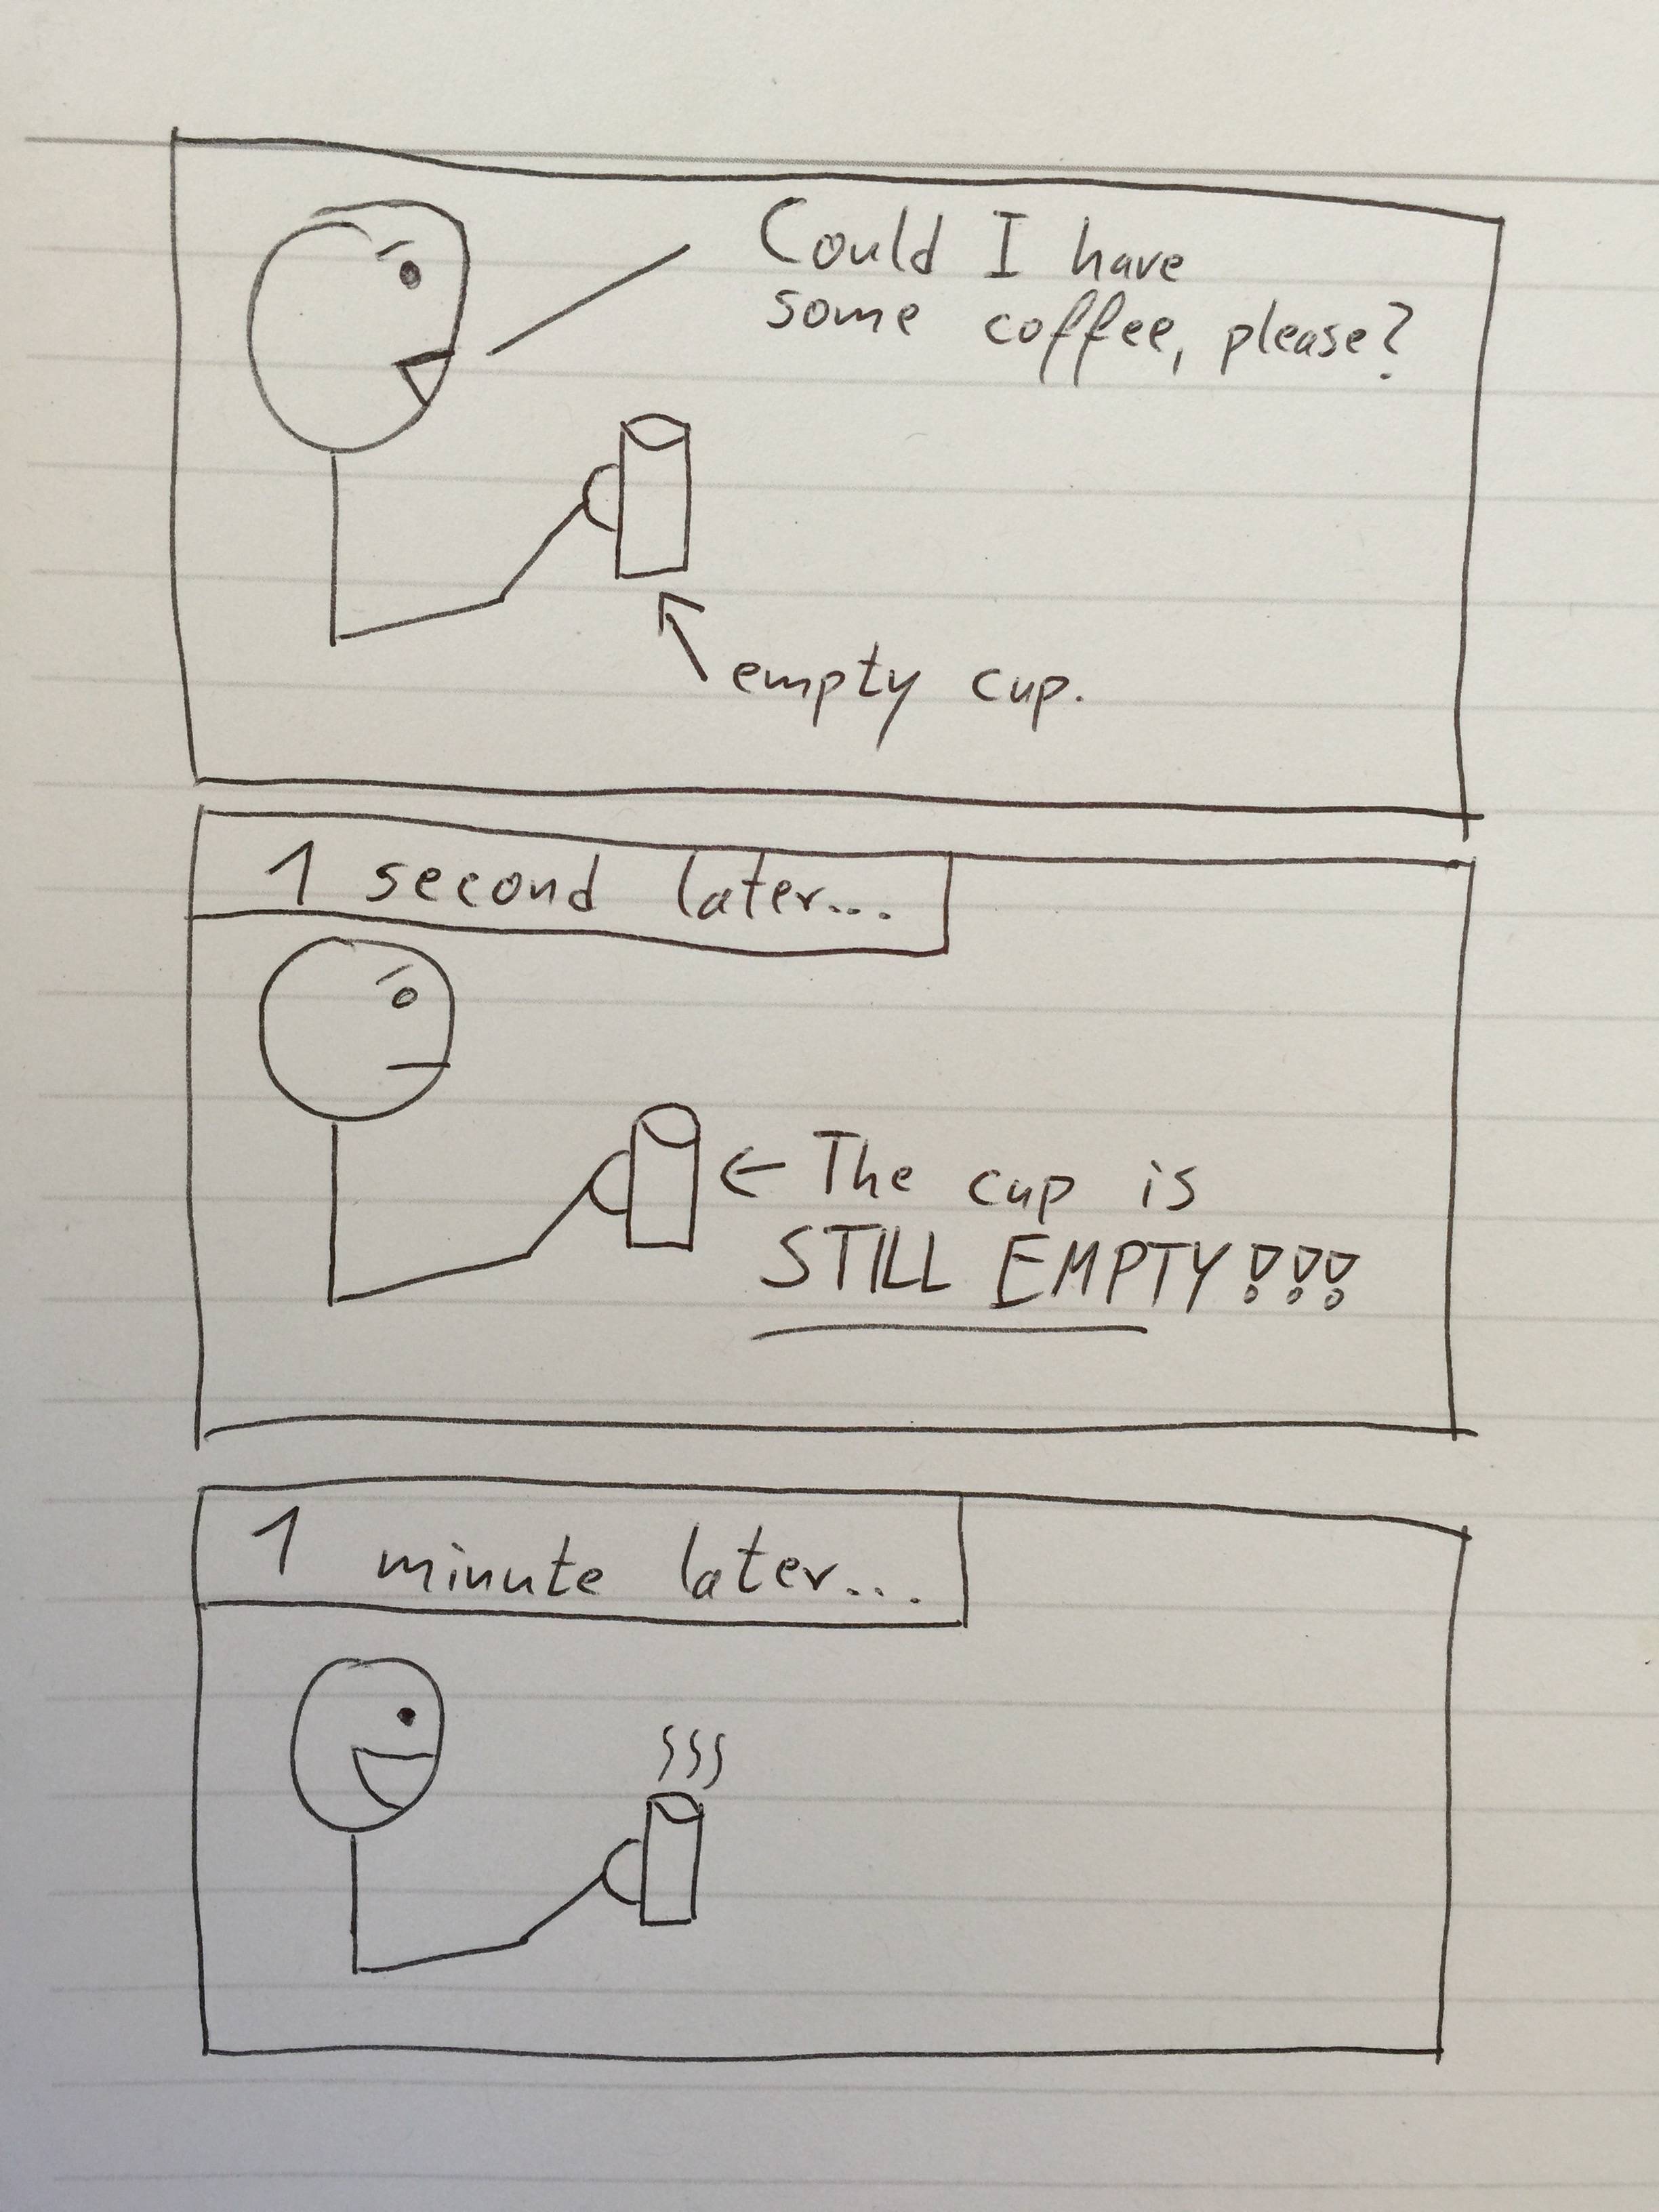 asynchronous call for coffee